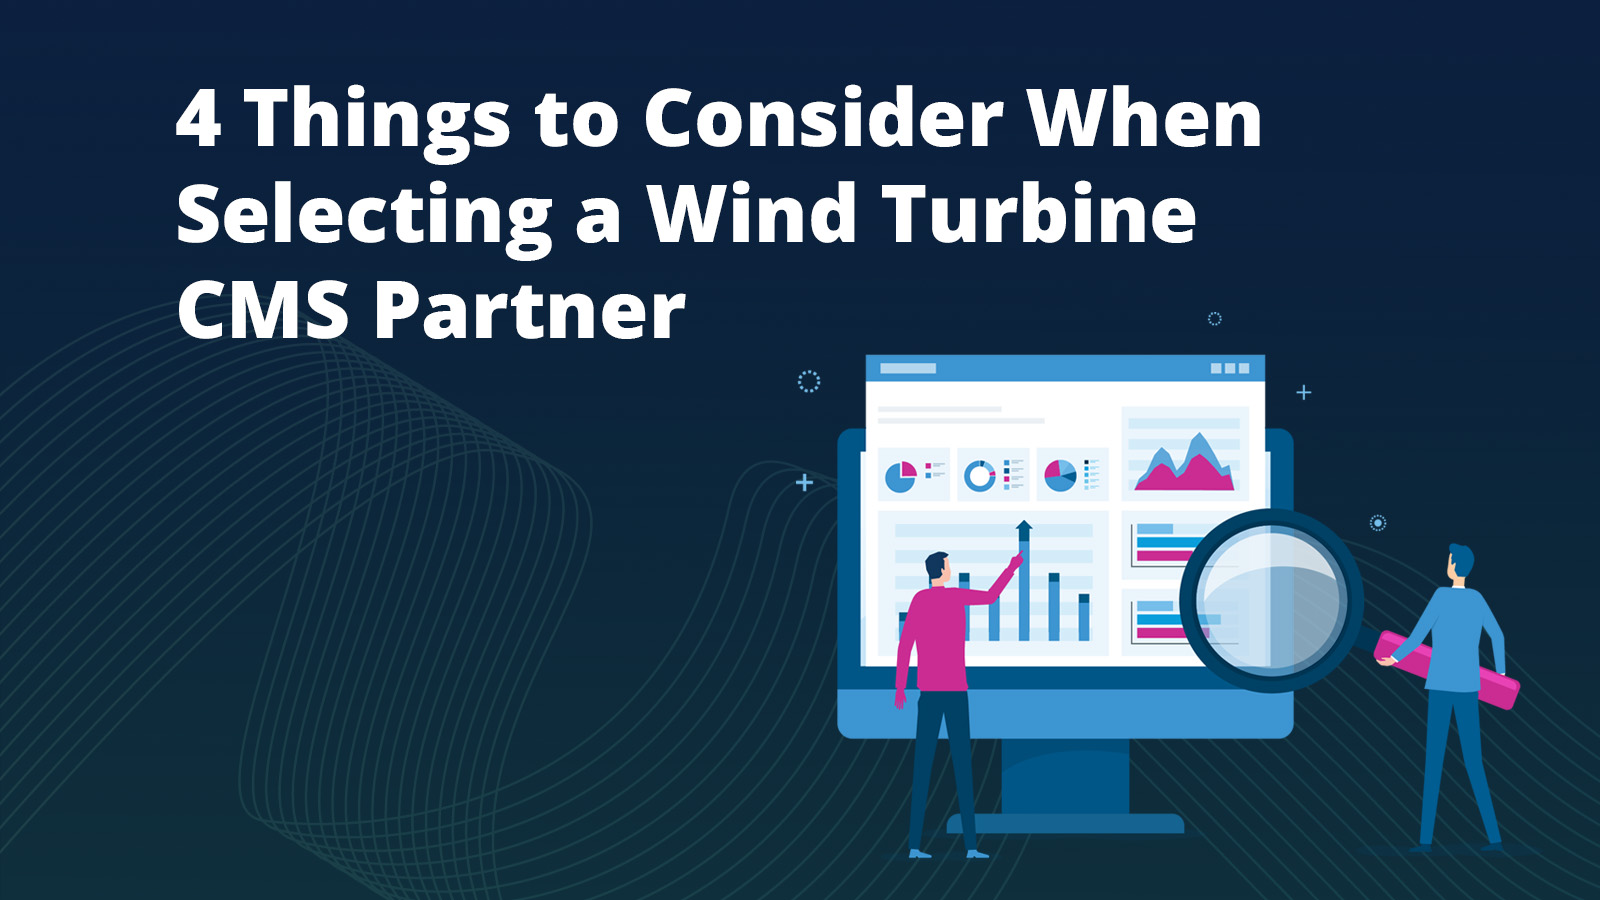 4 Things to Consider When Selecting a Wind Turbine CMS Partner